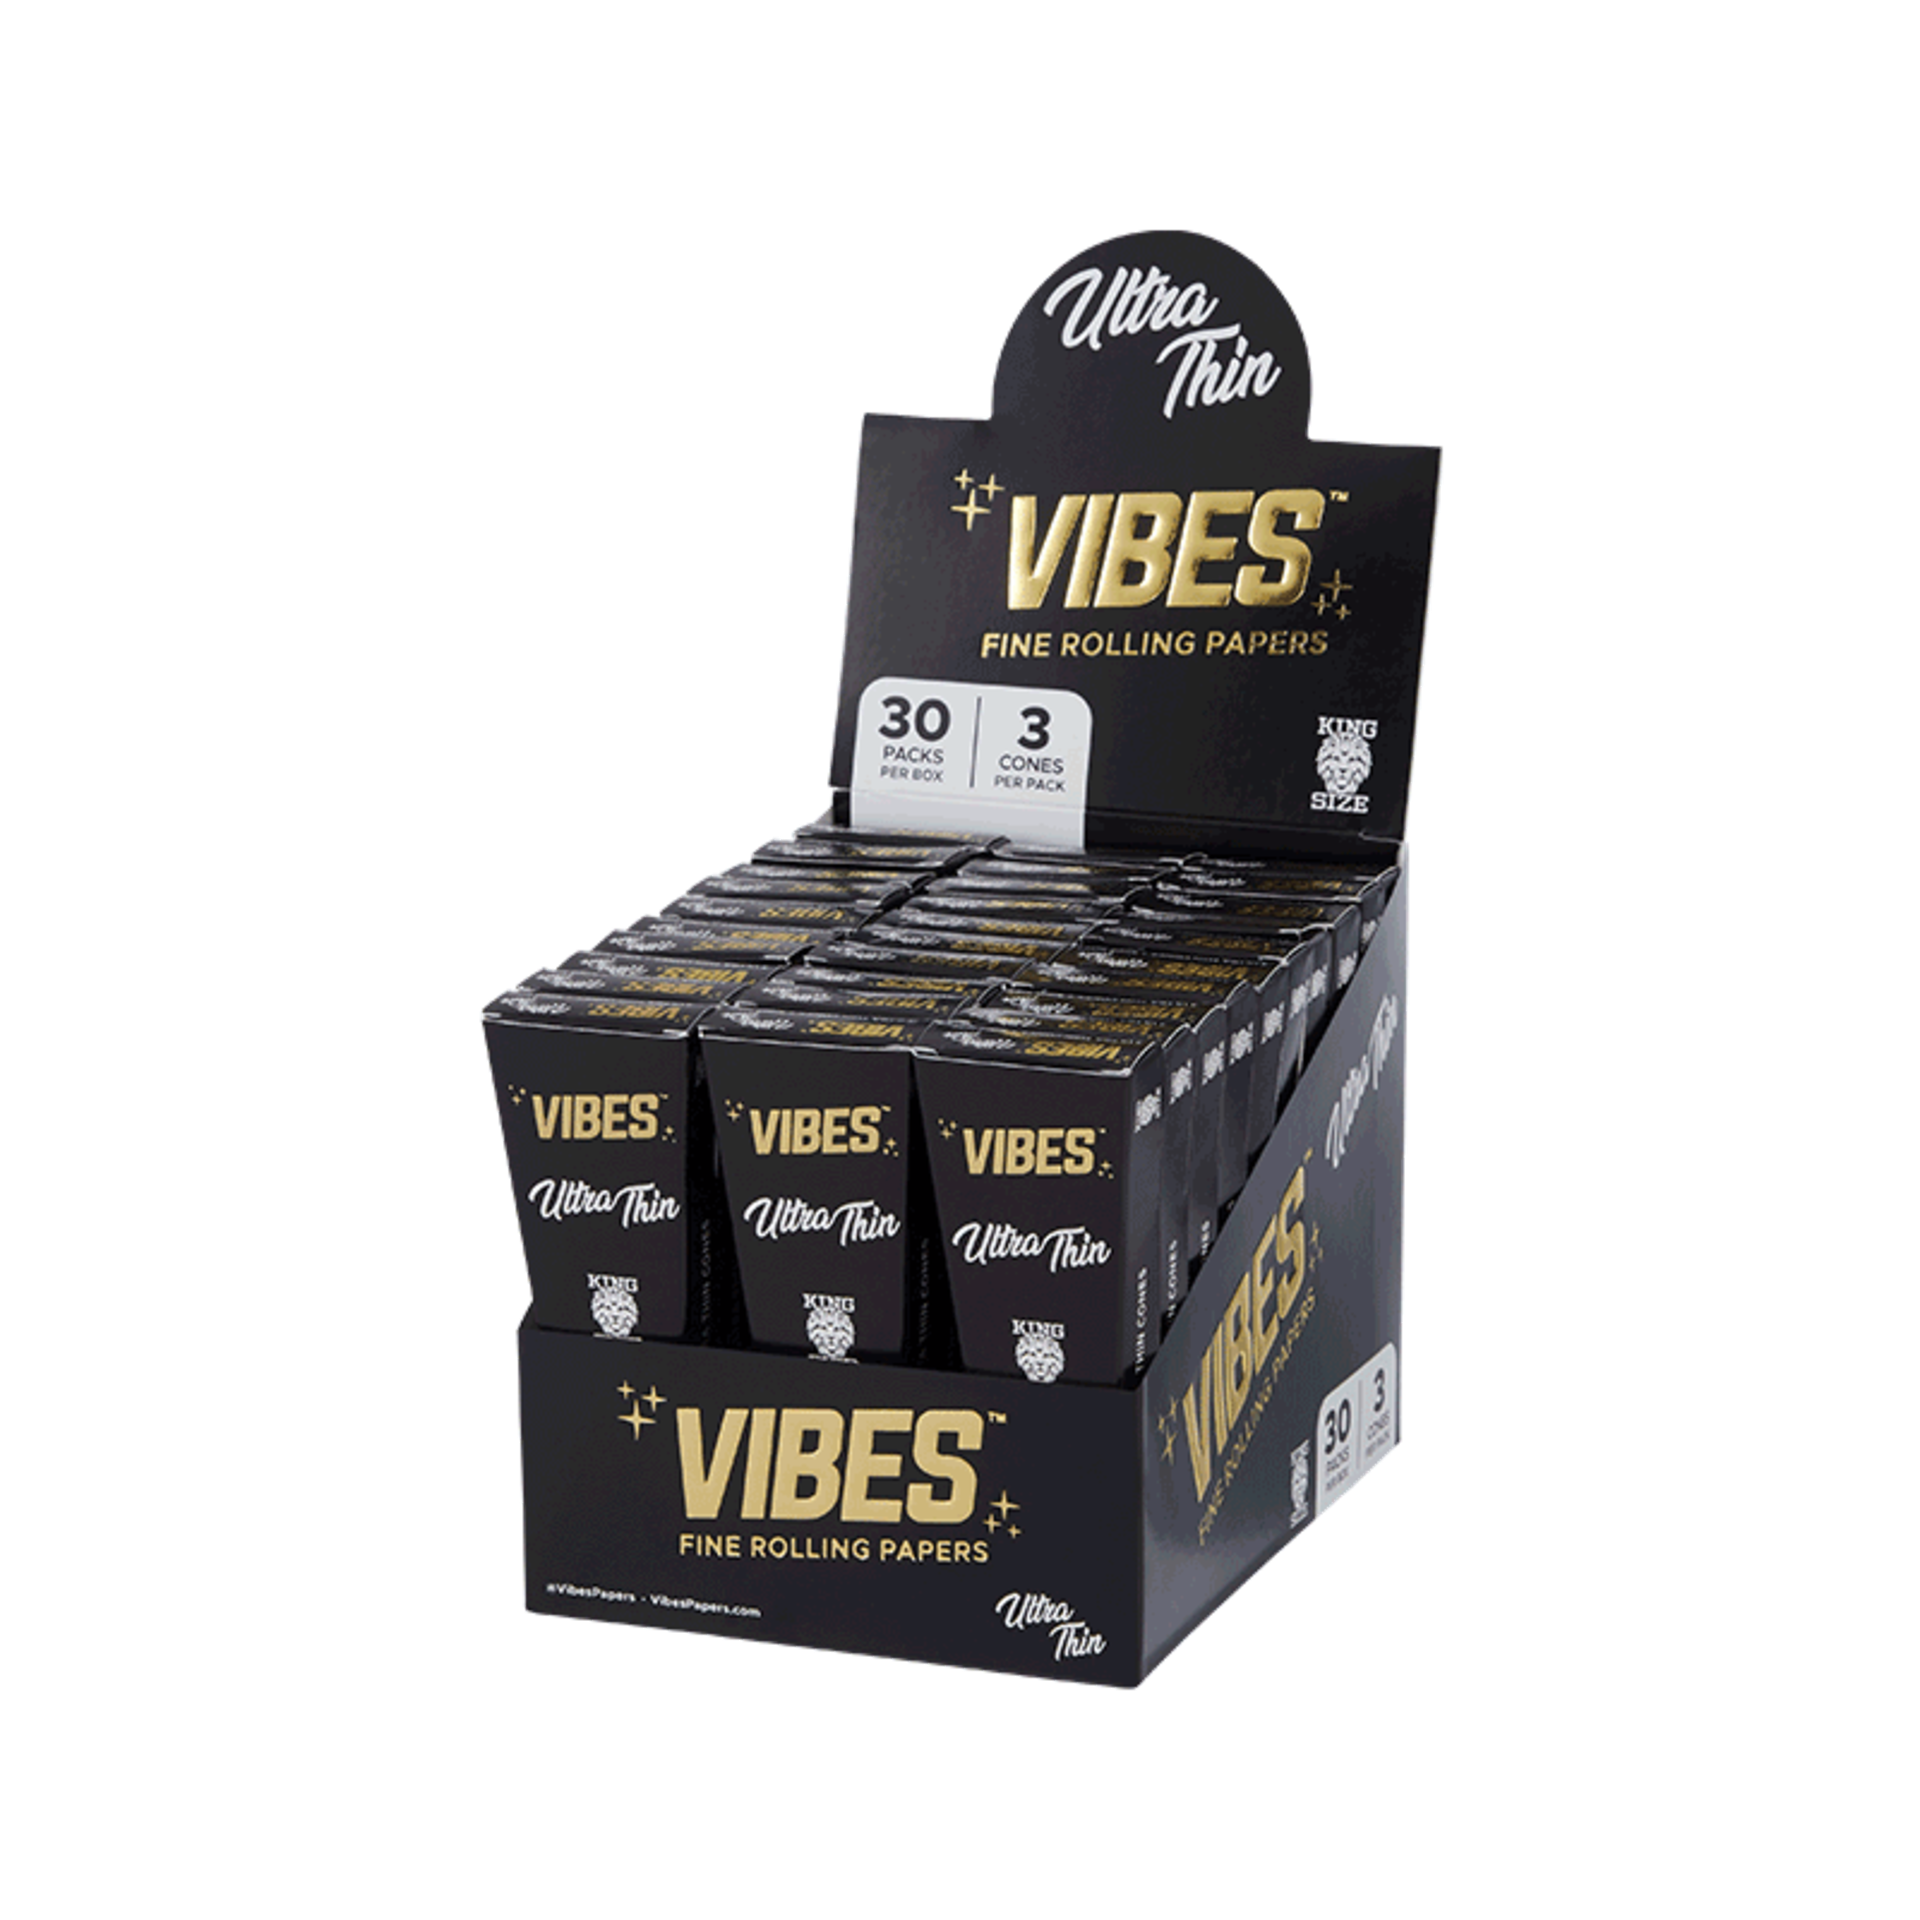 (Located in Moreno Valley, CA) Vibes - Cones - Coffin - King Size - 10 Cases, UltraThin (Black), 30